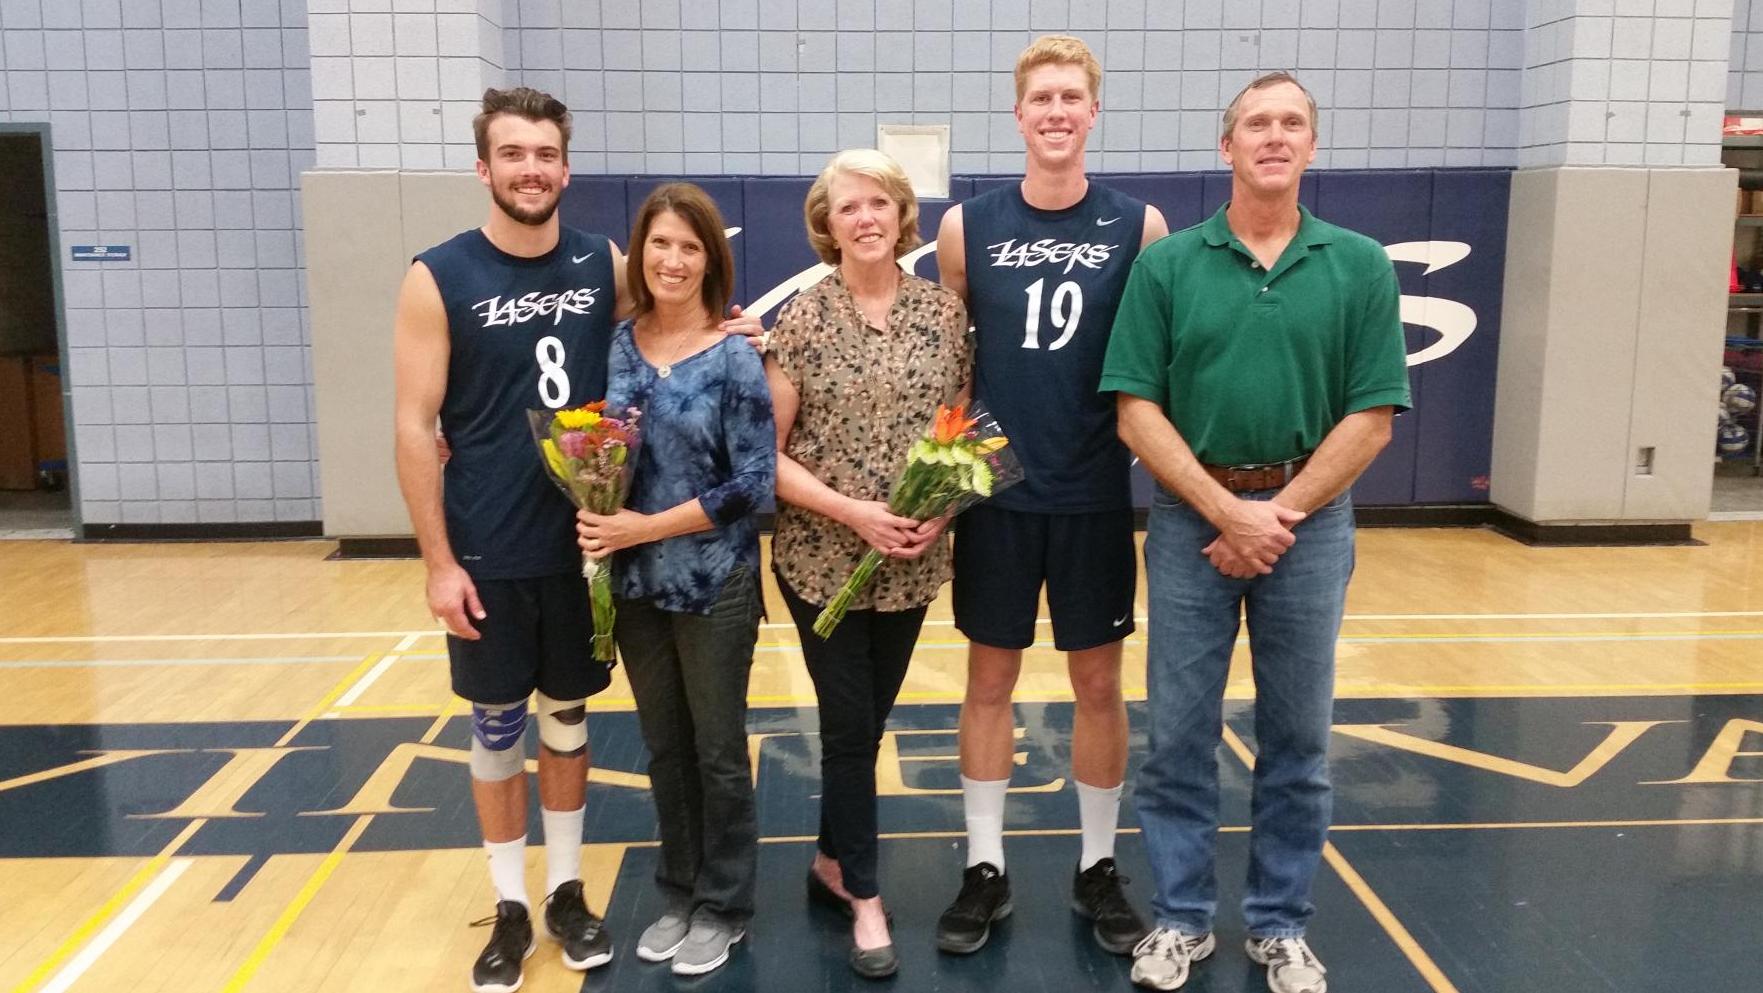 Men's volleyball team honors sophomores, sweeps Miramar